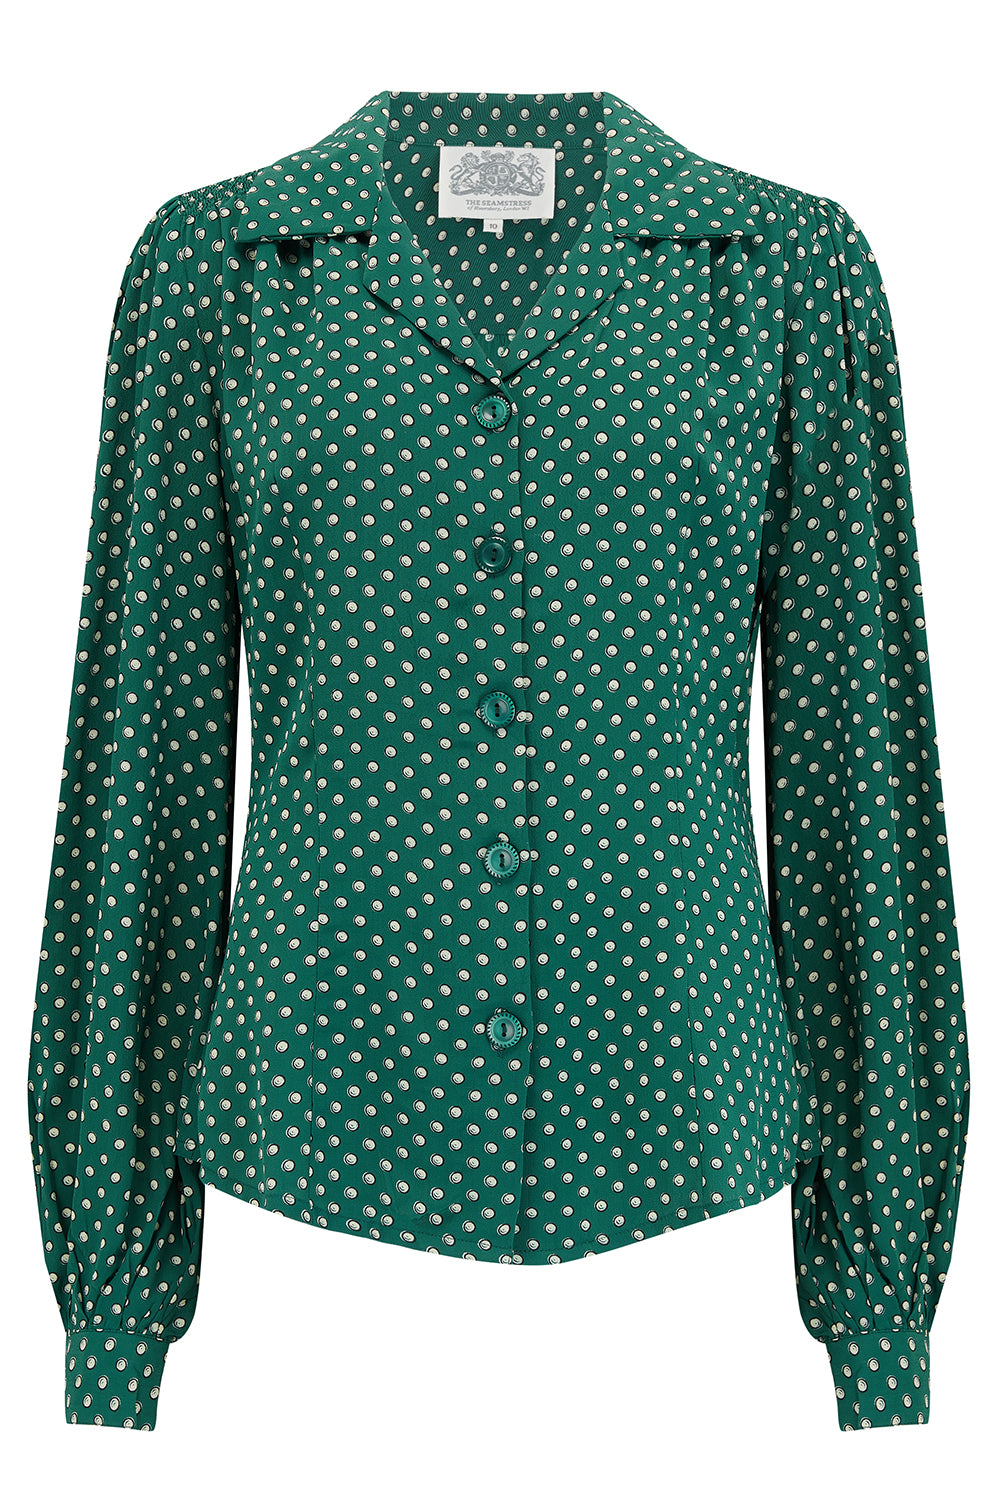 Poppy Long Sleeve Blouse in Green Ditzy Dot , Authentic & Classic 1940s Vintage Style - CC41, Goodwood Revival, Twinwood Festival, Viva Las Vegas Rockabilly Weekend Rock n Romance The Seamstress Of Bloomsbury